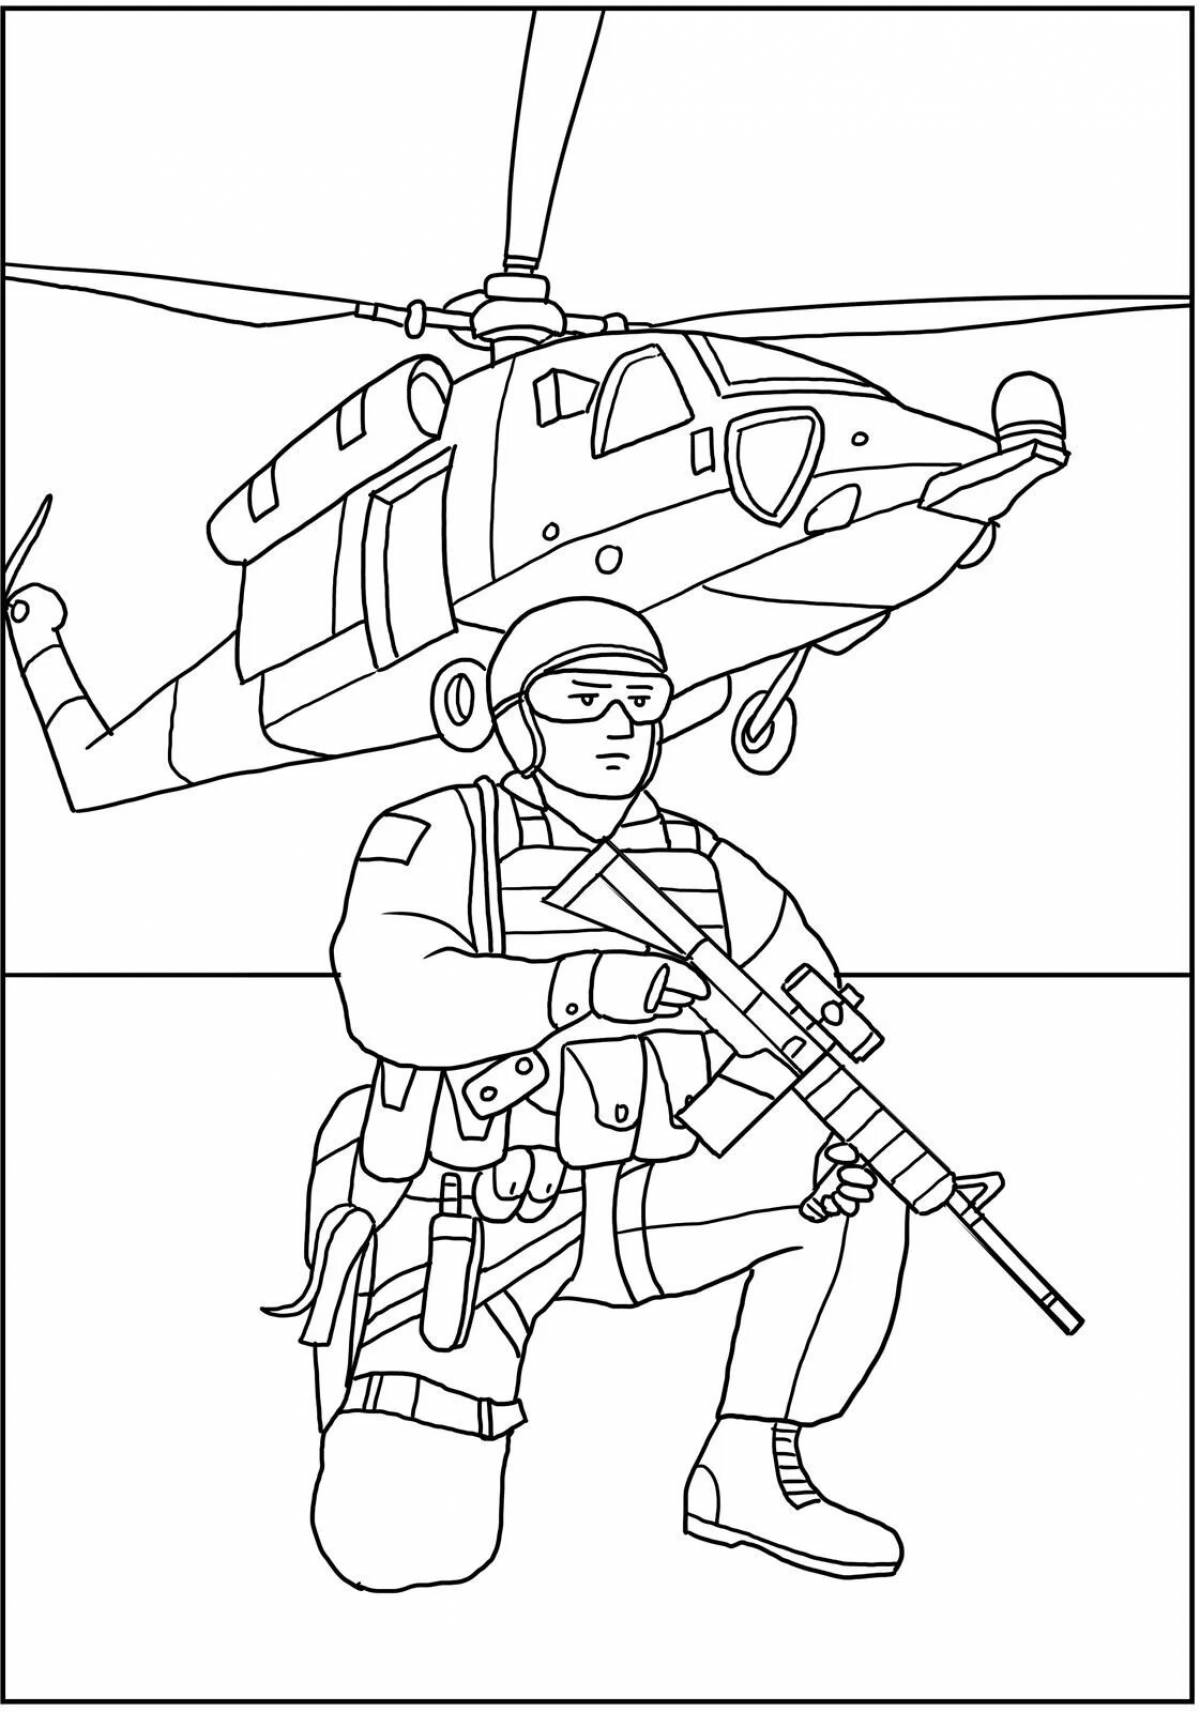 Colorful Paratrooper Coloring Page for Toddlers